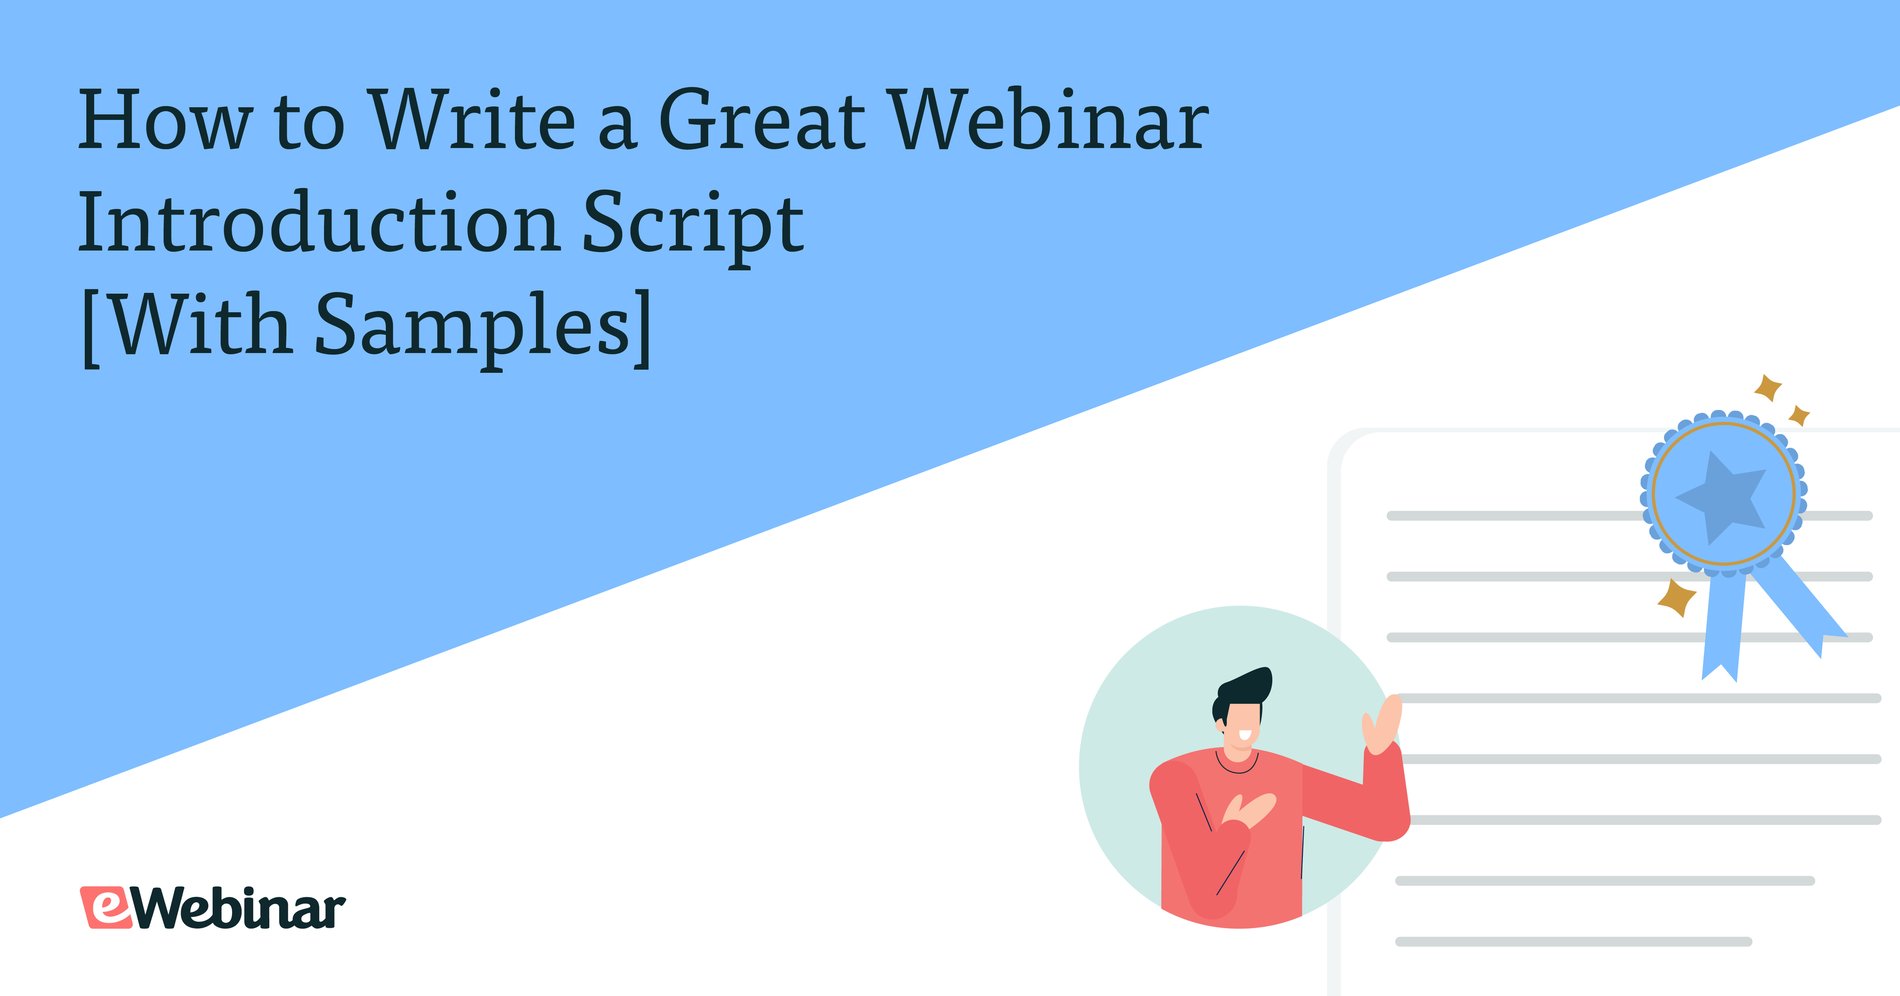 How to Write a Great Webinar Introduction Script [with Samples]